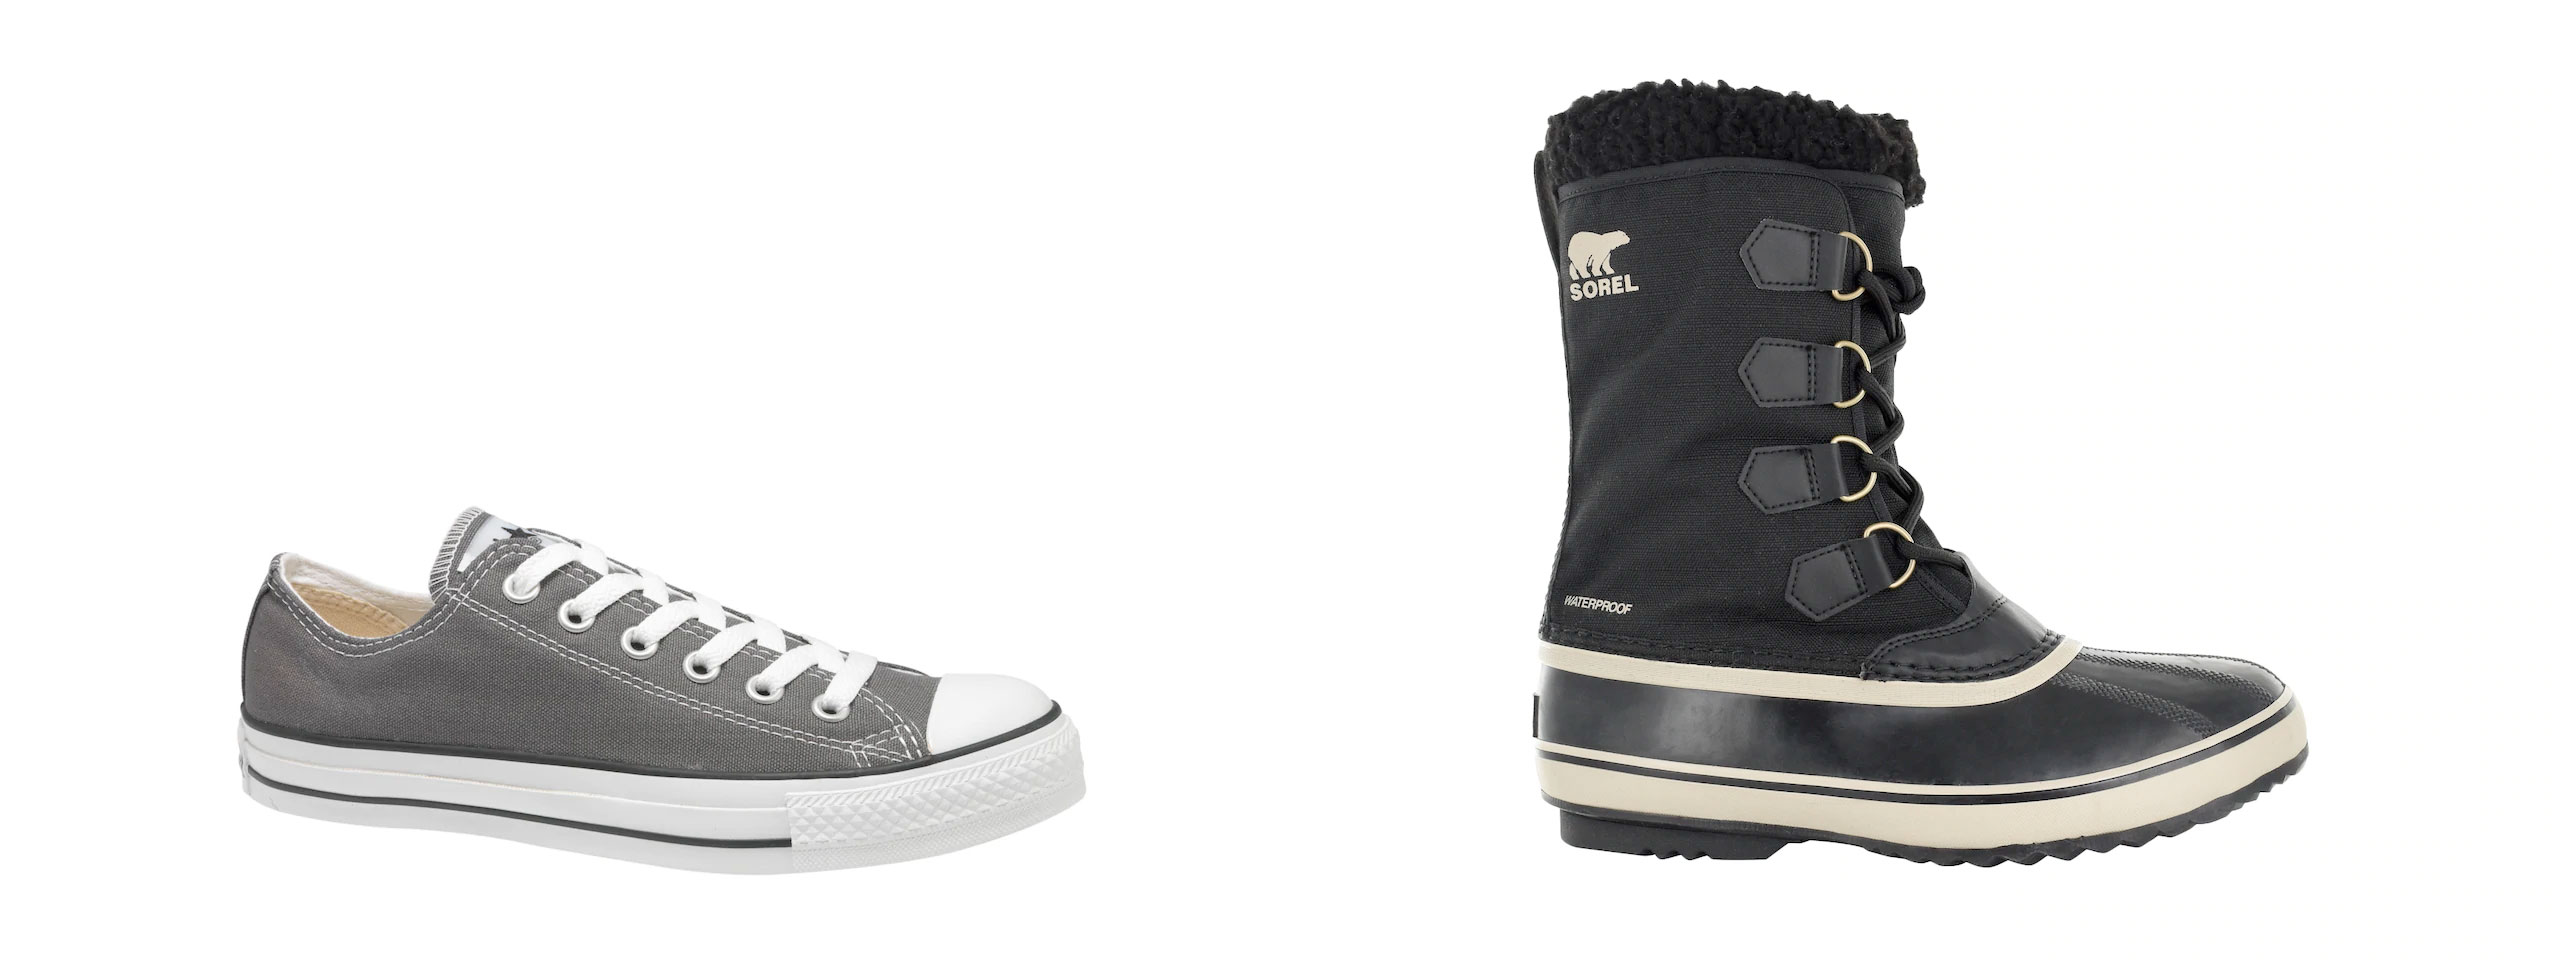 The Shoe Company：女裝Converse Chuck Taylor Low Oxford只賣$25.12